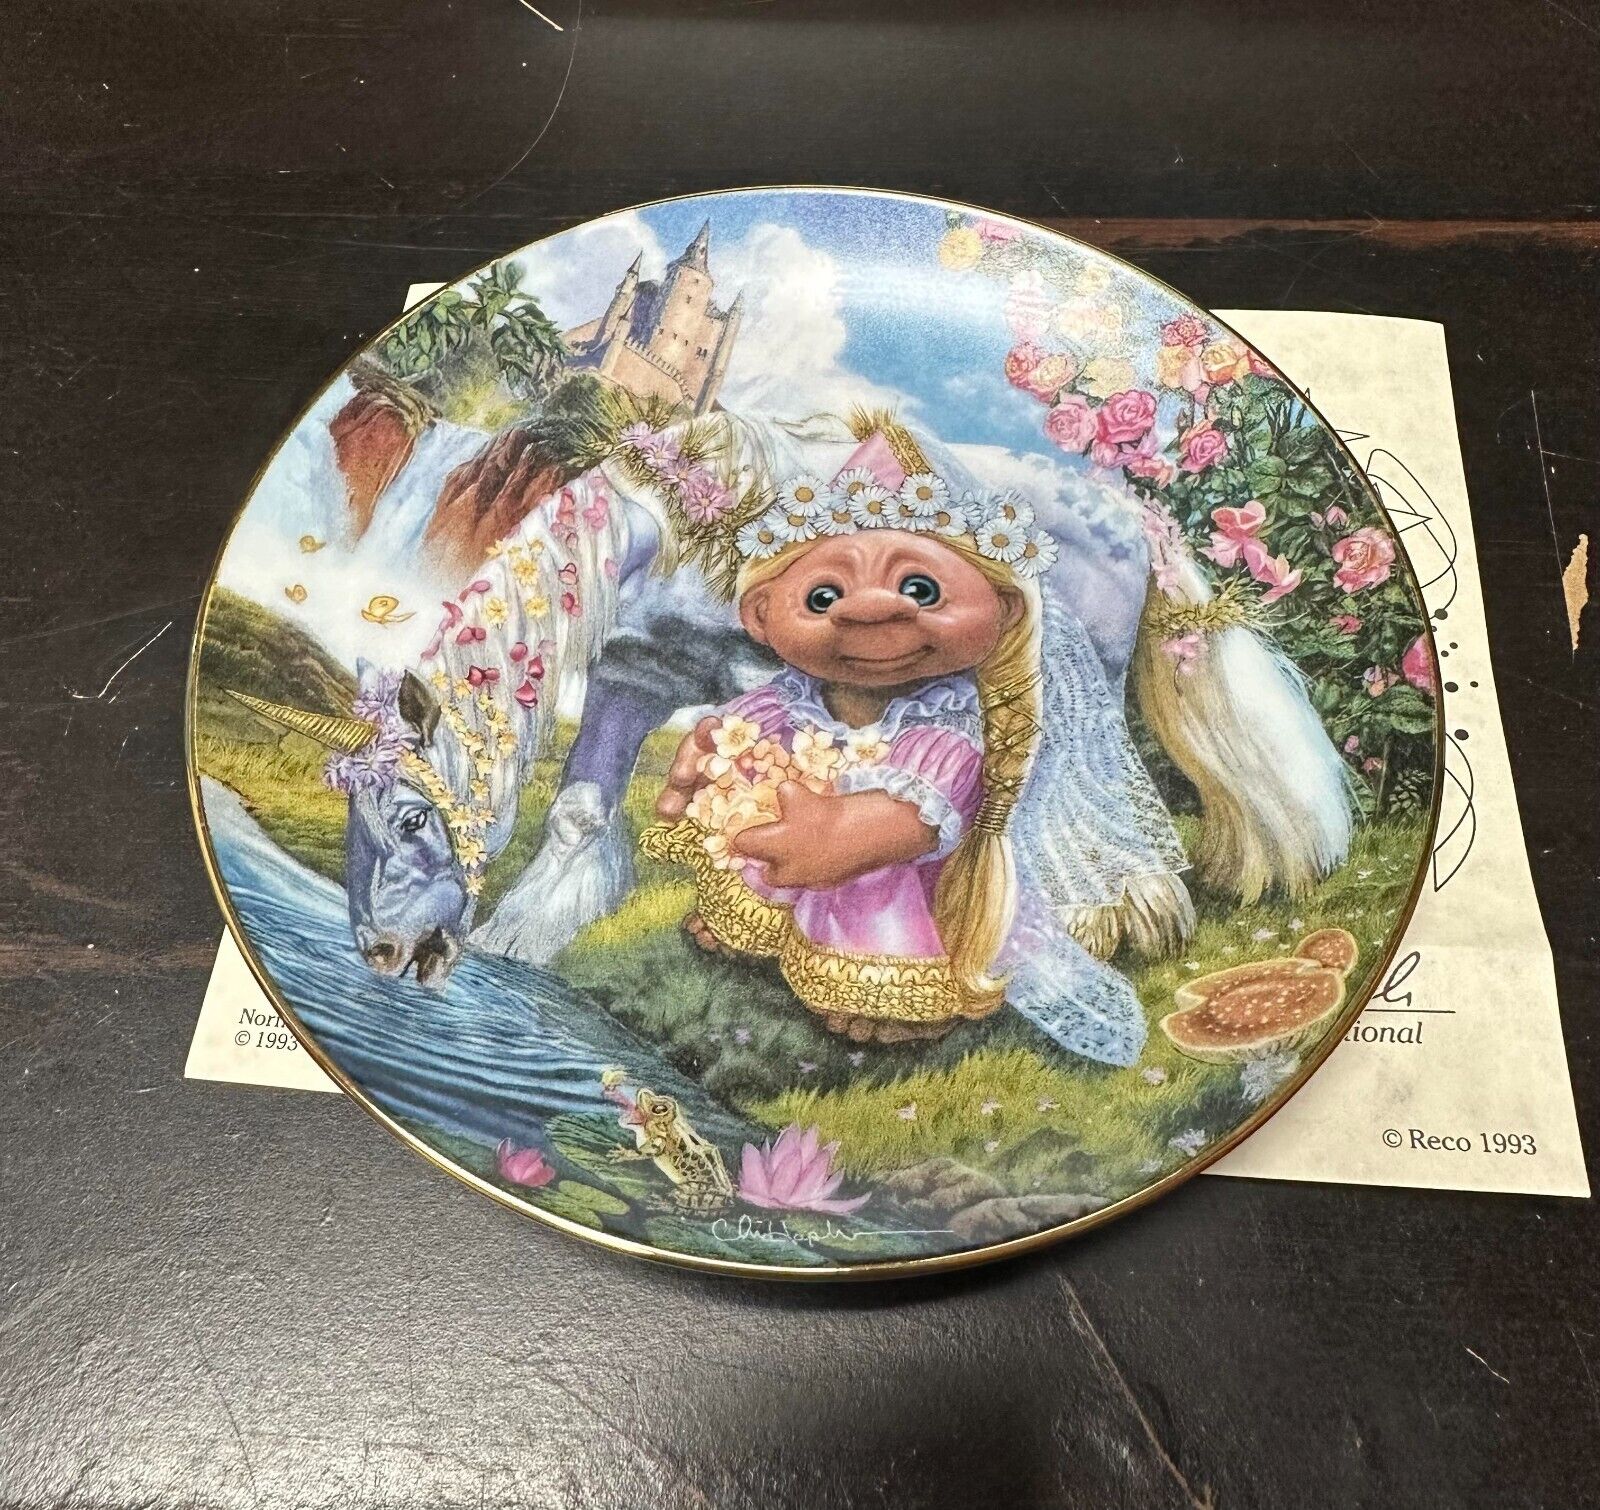 The Enchanted Norfin Trolls Maiden Collector Plate #1901TM - Chris Hopkins 1993